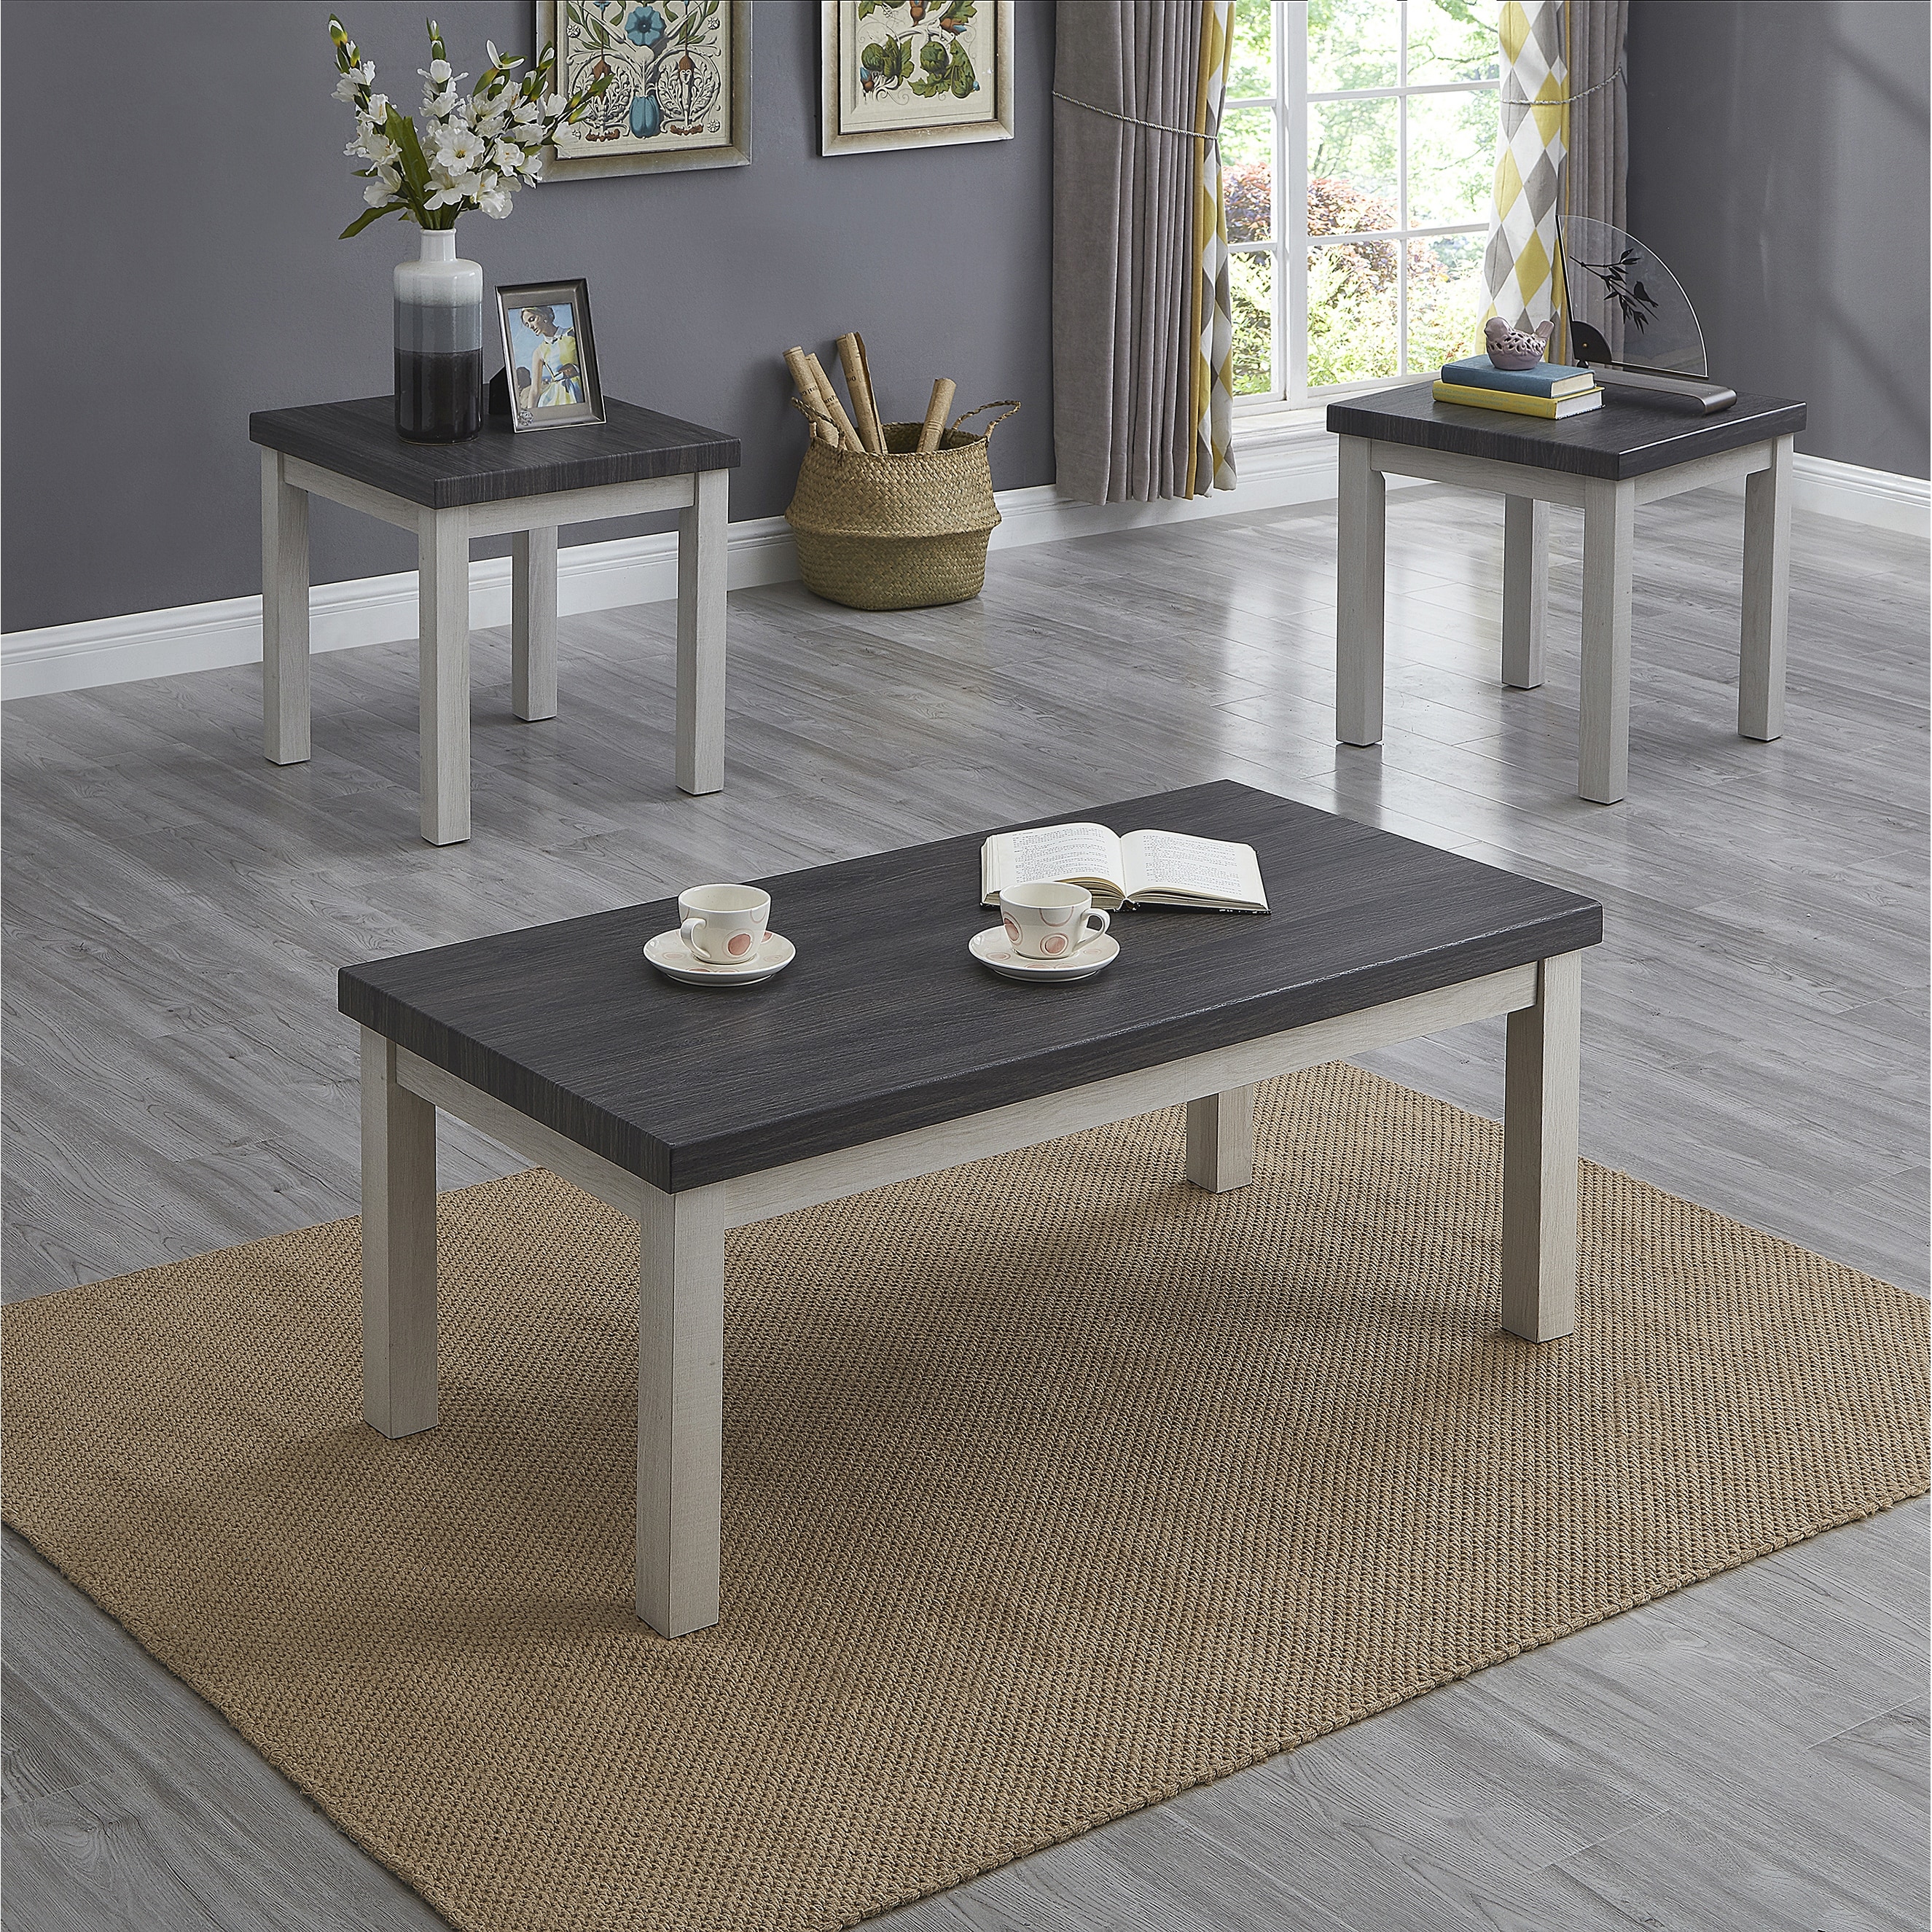 Ronan Two Tone Wood 3 Piece Living Room Table Set Overstock 32064129